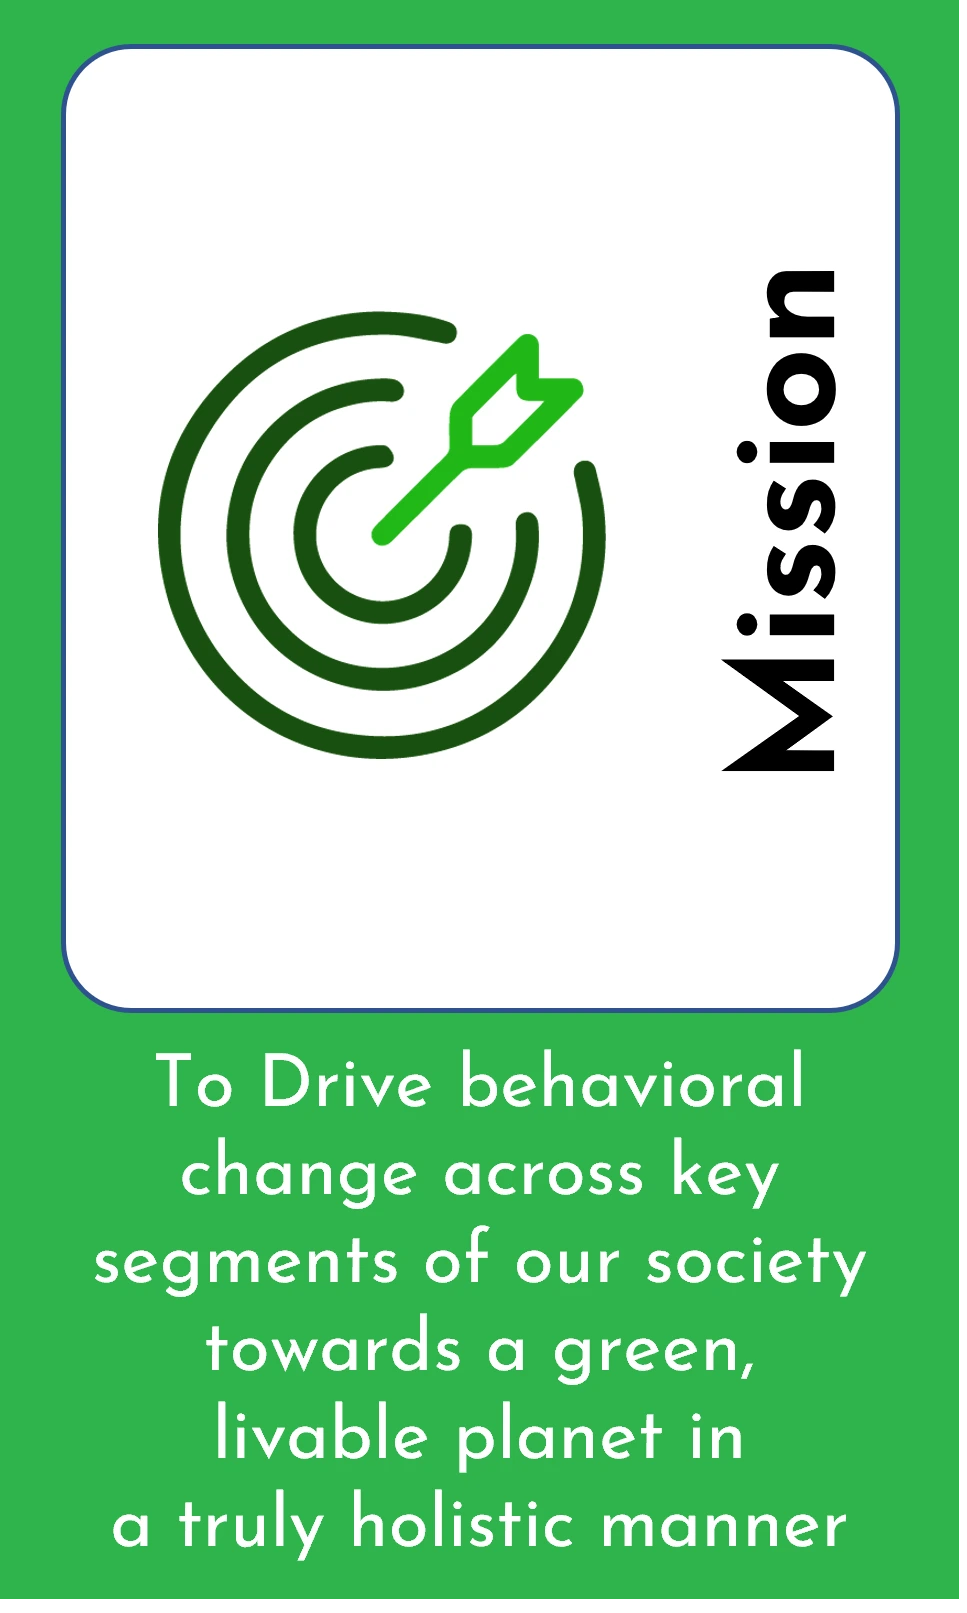 Driving individual and institutional behavior change